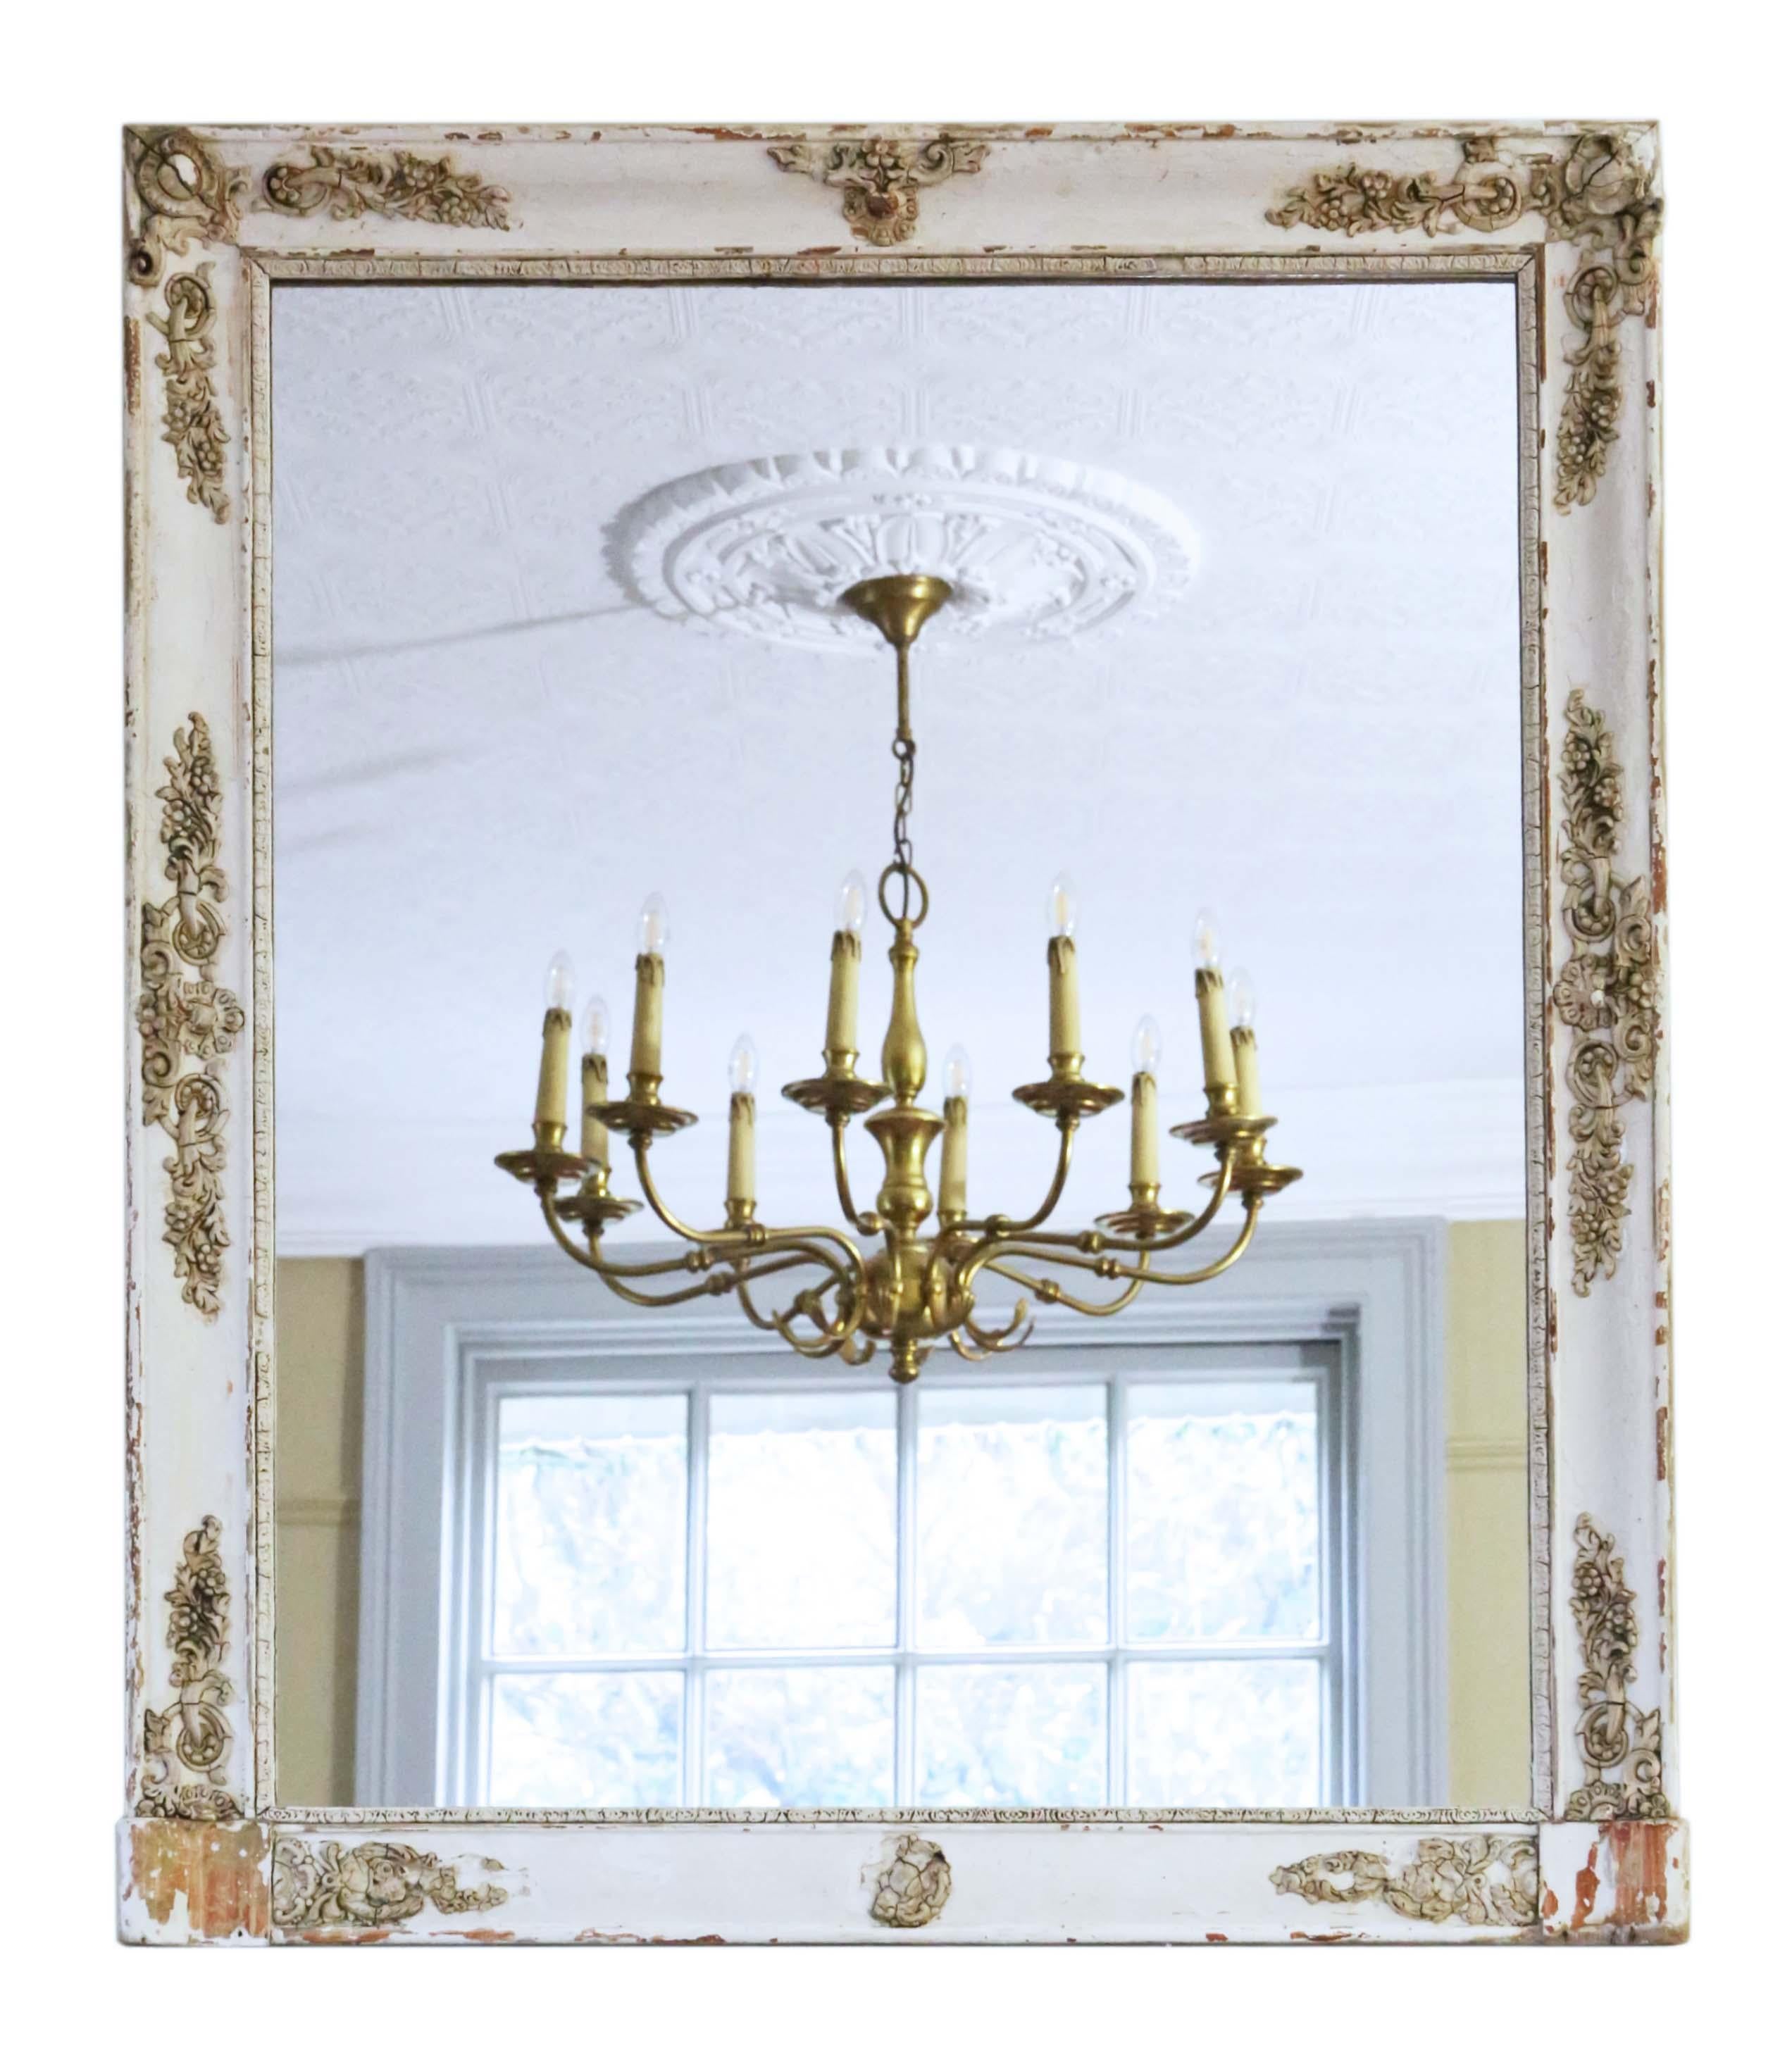 Antique large quality French white/cream overmantle or wall mirror 19th century. Lovely charm and elegance. The mirror has a paneled back, with an aged and distressed finish, minor losses and touching up here and there.

A great find, that would